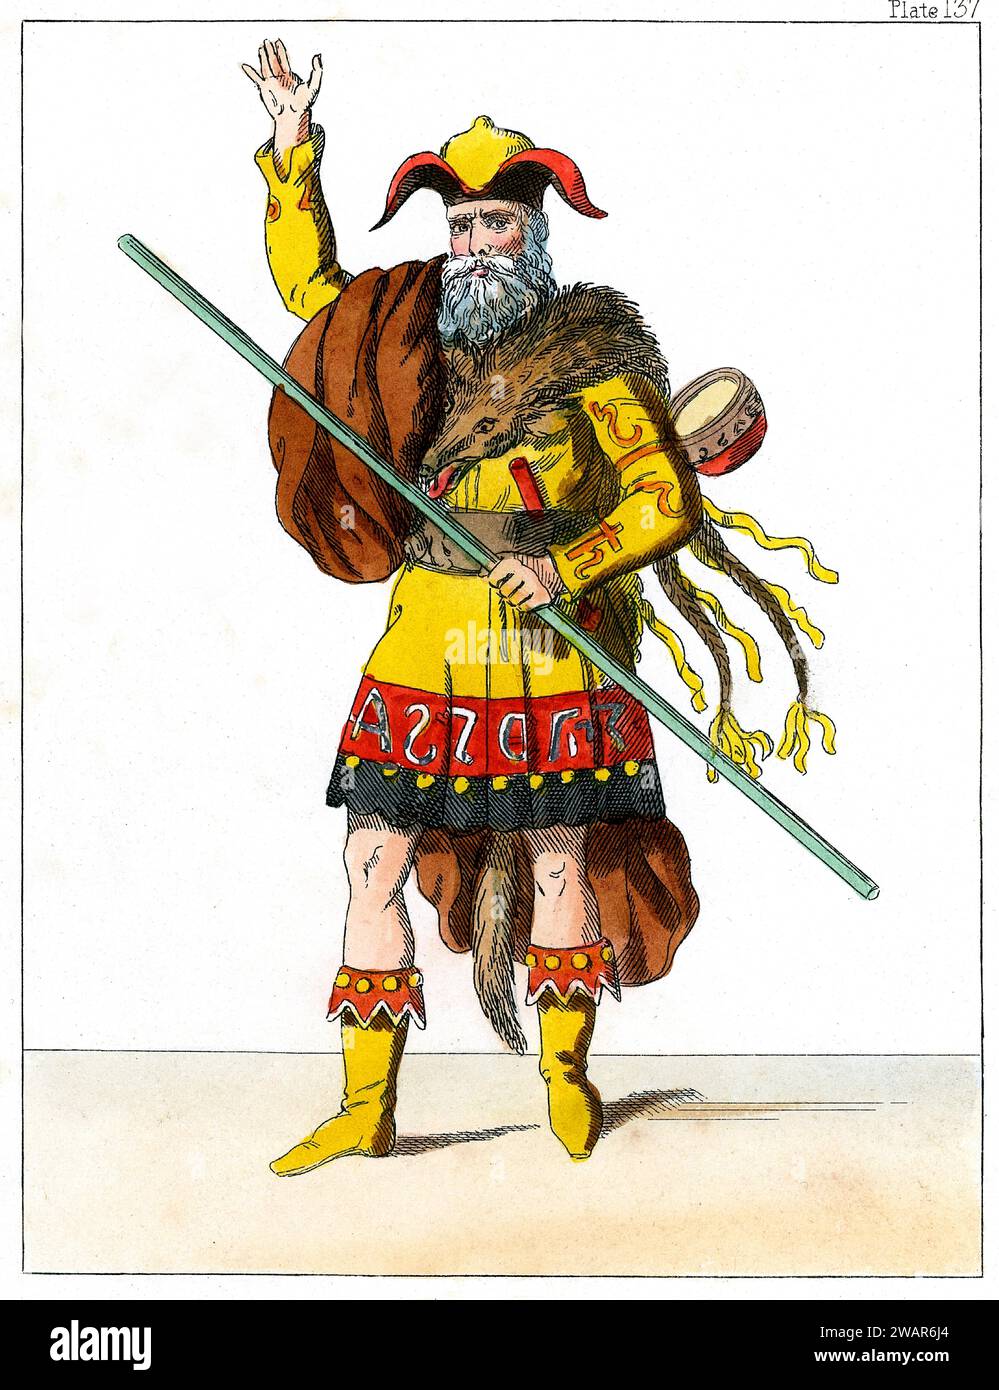 A Wizard in Costume based on Osmond, a Saxon Magician and Healer, in John Dryden's King Arthur, or The British Worthy (1691), itself based on Merlin the Wizard in the Legend of King Arthur.  c19th coloured engraving or Illustration Stock Photo